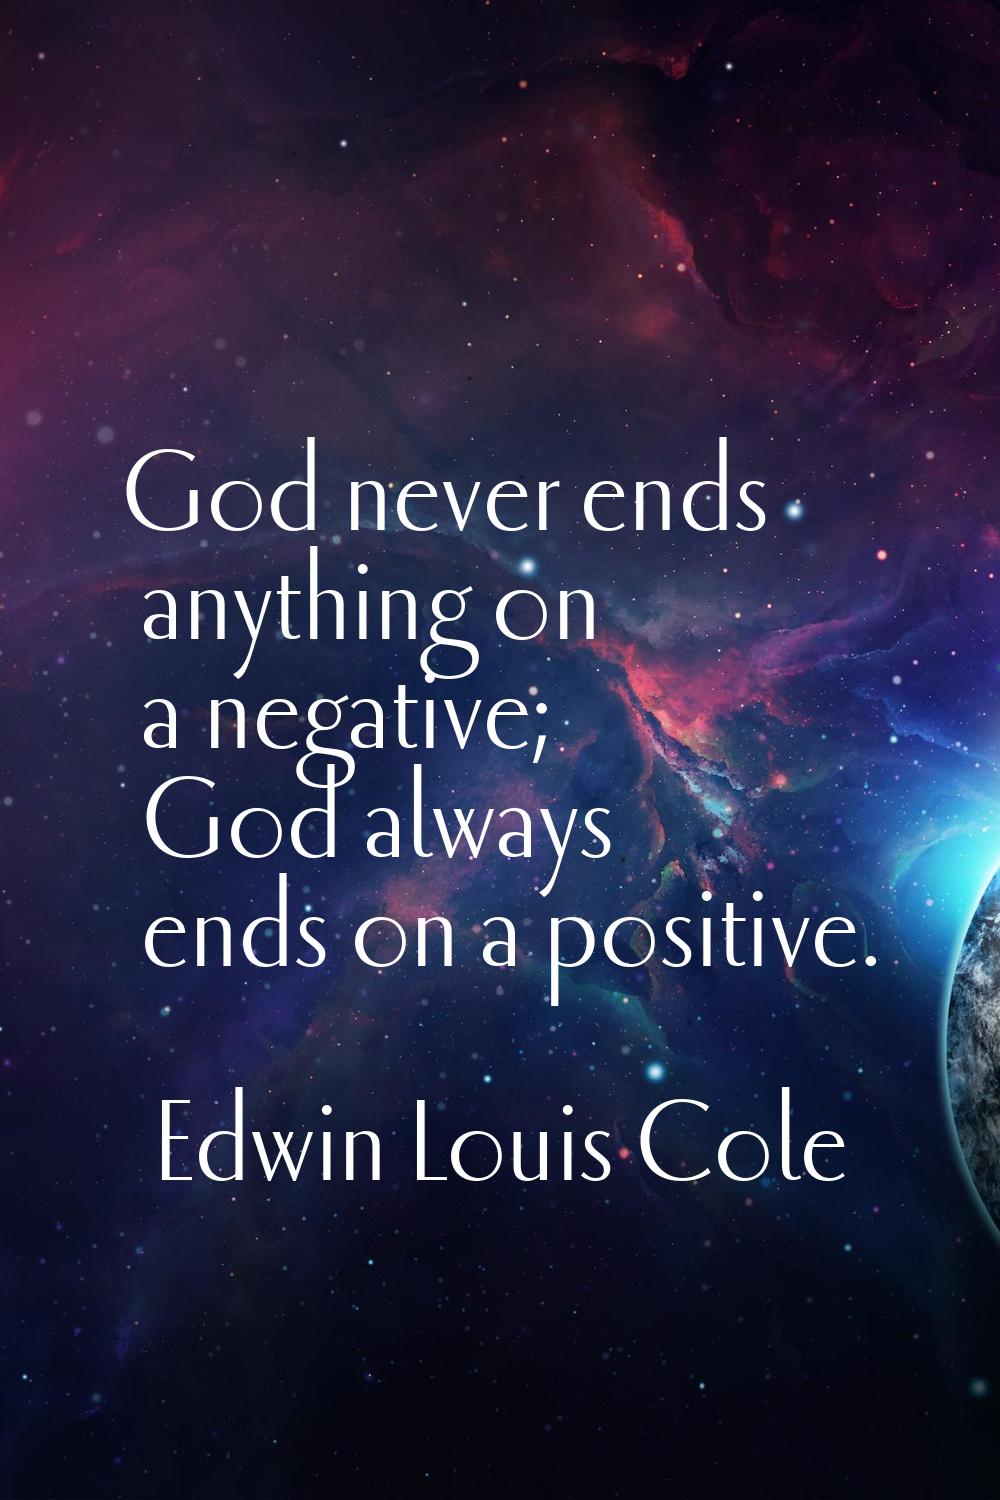 God never ends anything on a negative; God always ends on a positive.